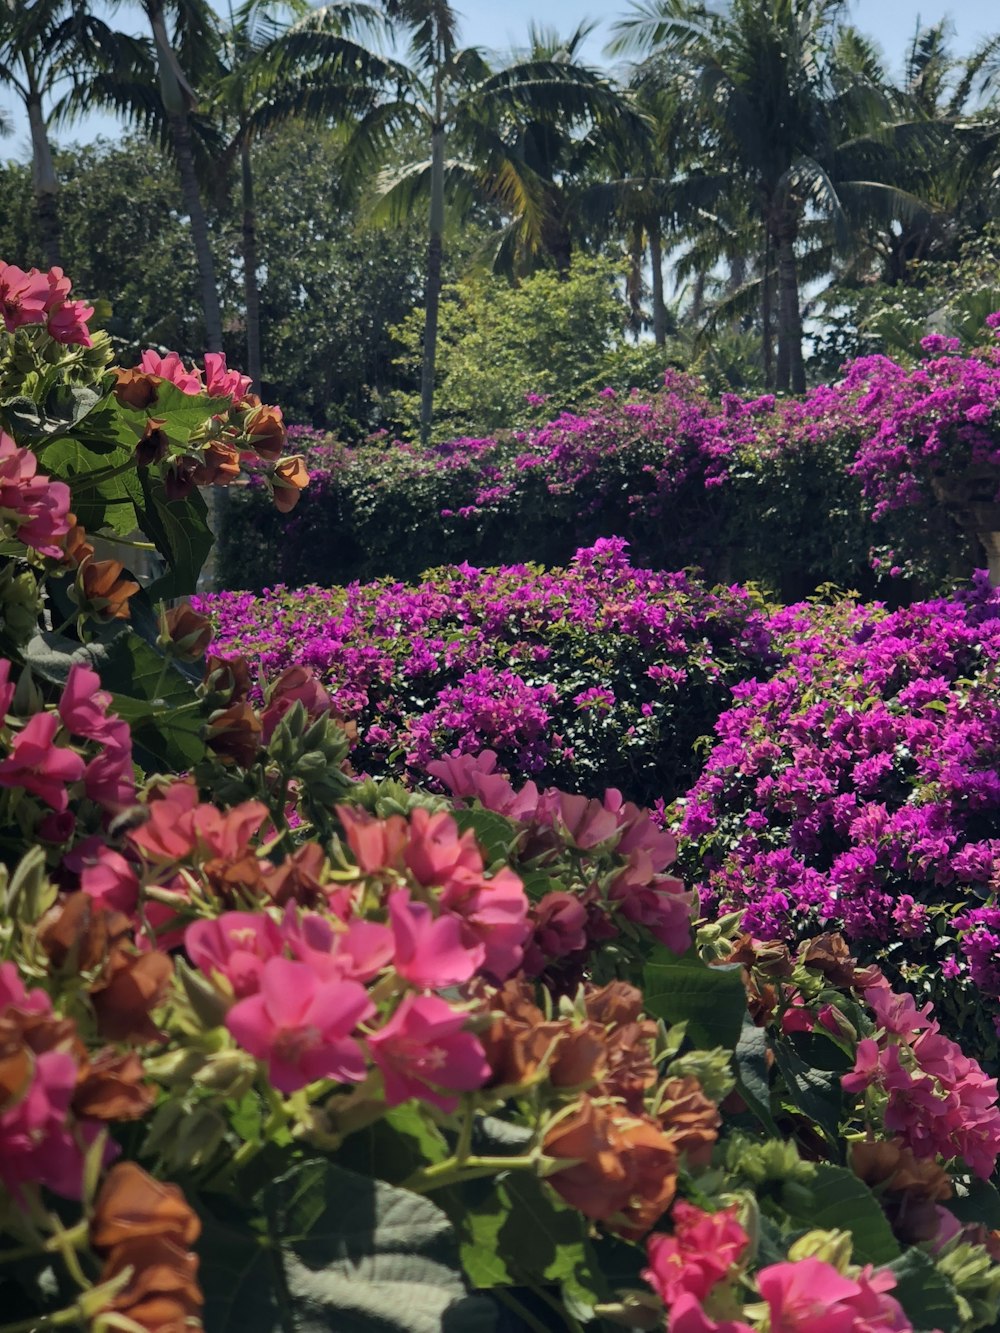 purple and pink bougainvilleas in bloom